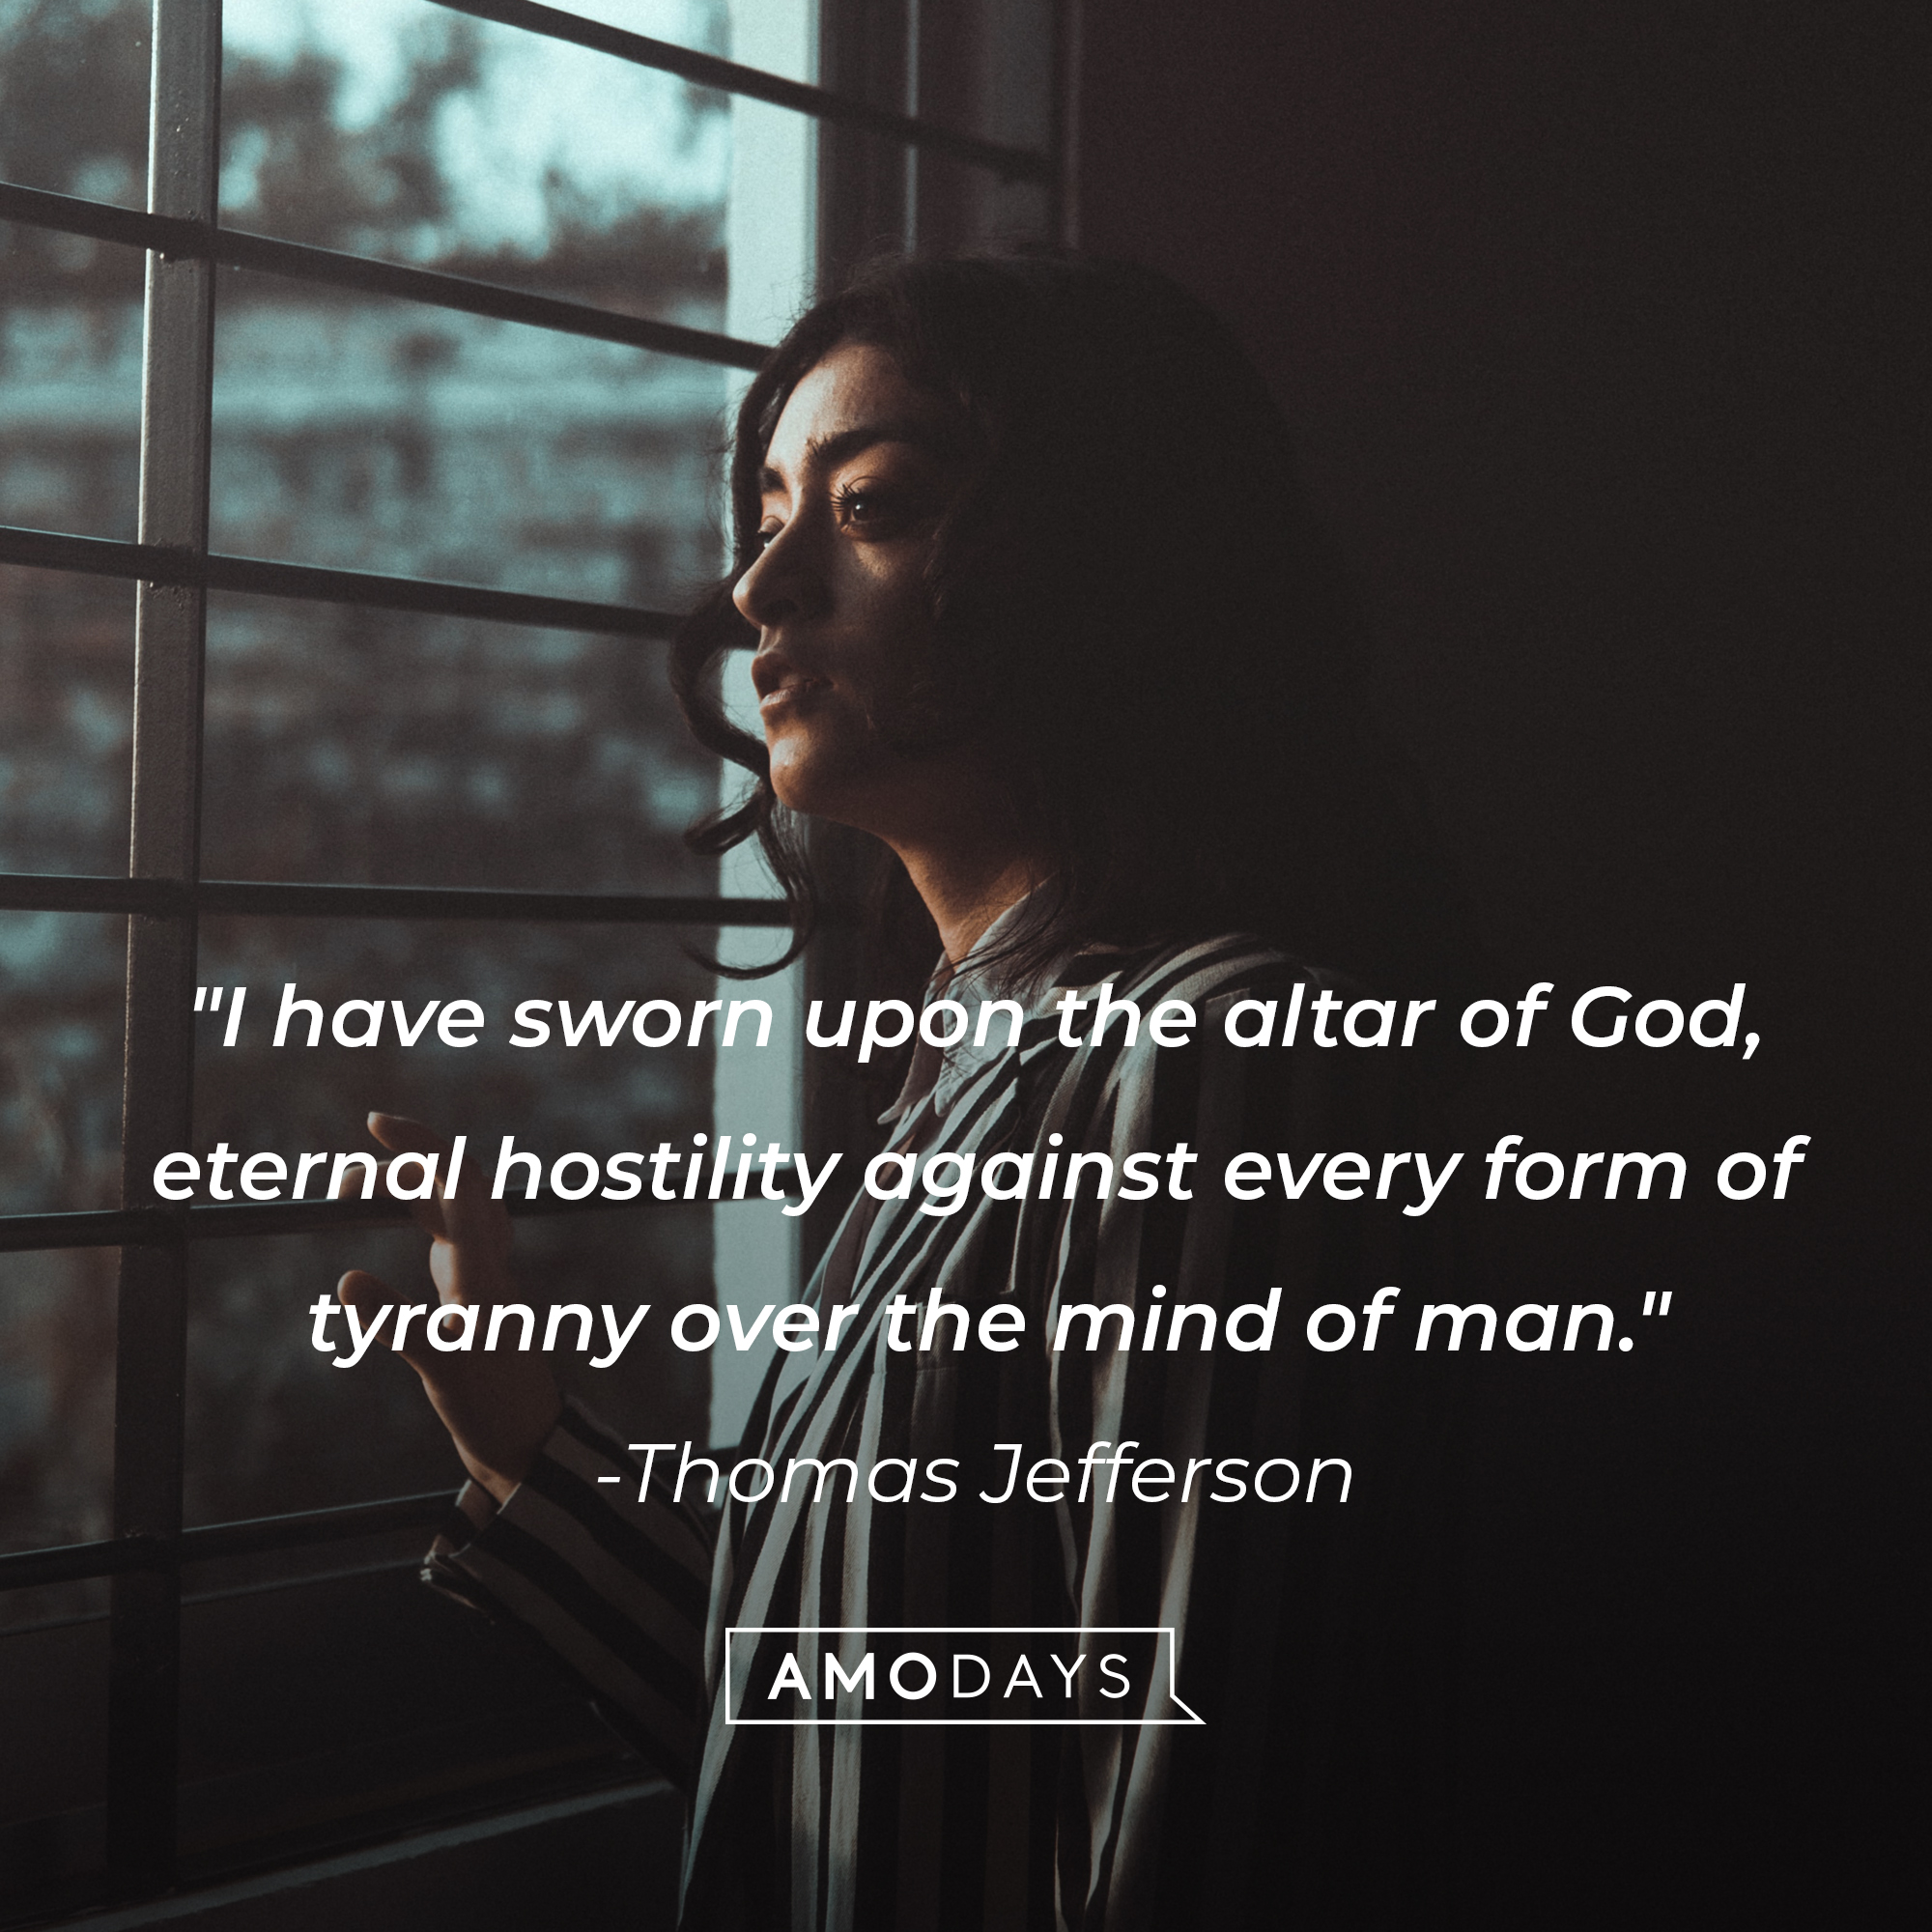 Thomas Jefferson's quote: "I have sworn upon the altar of God, eternal hostility against every form of tyranny over the mind of man." | Image: AmoDays